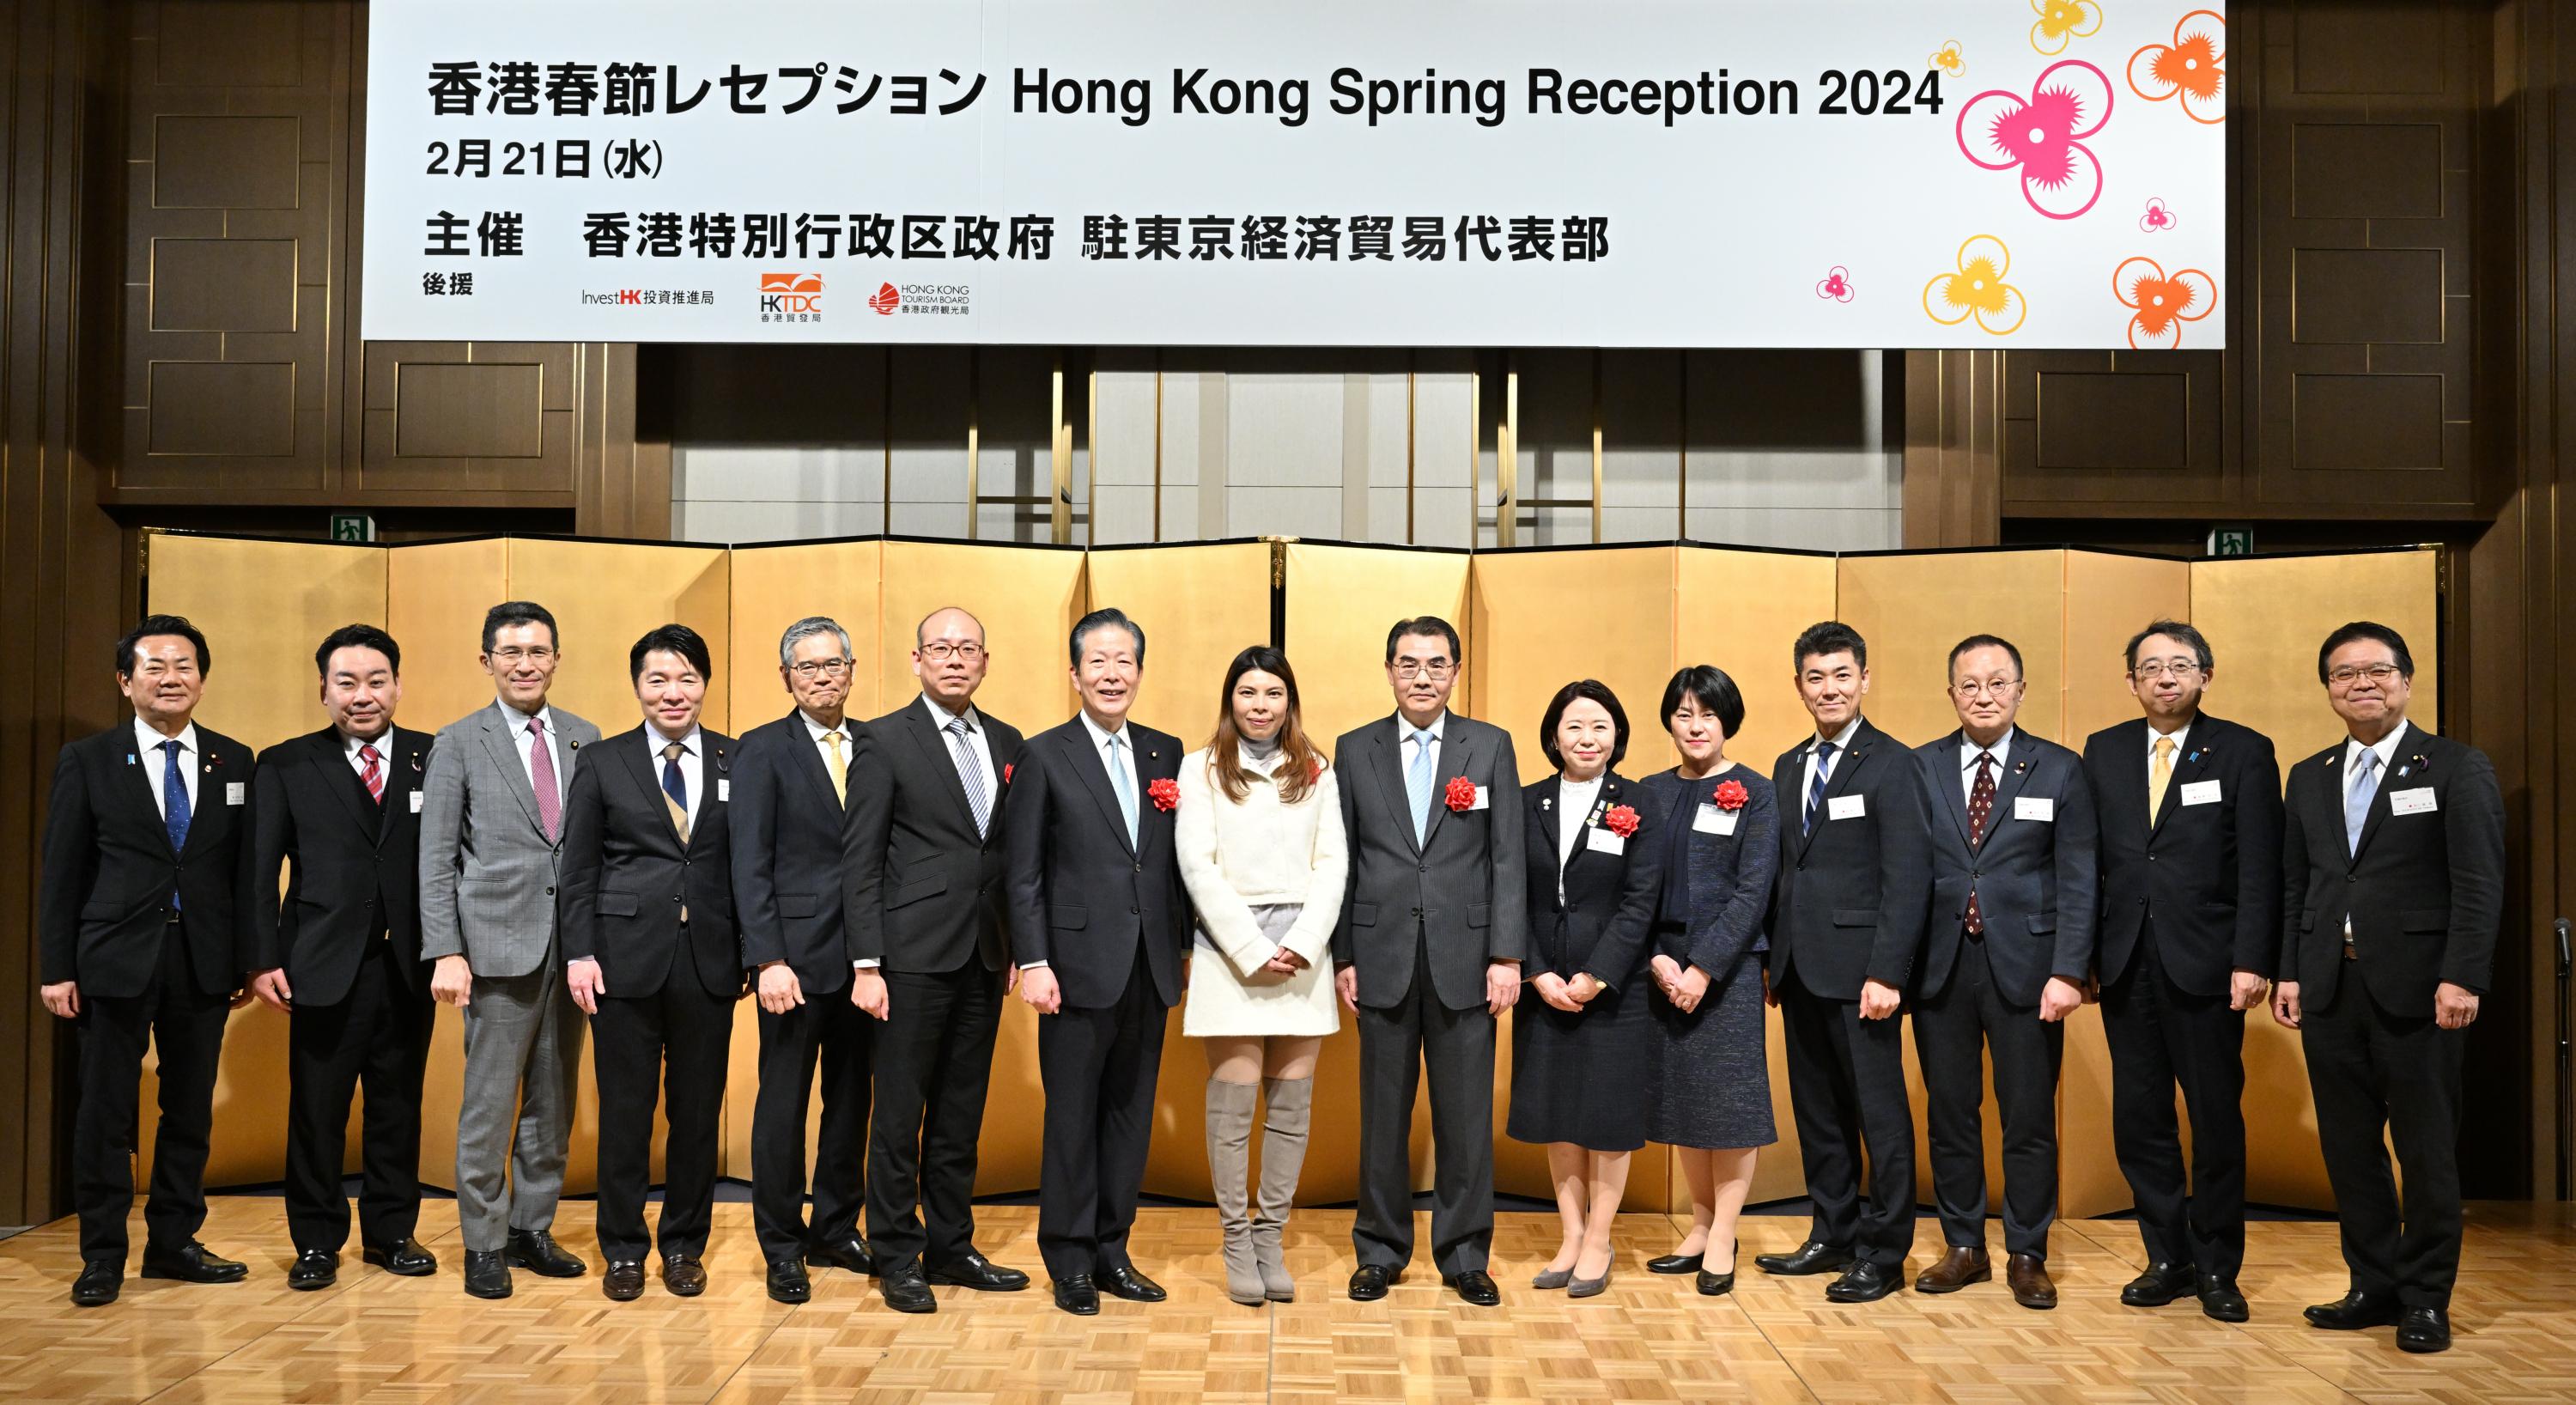 The Principal Hong Kong Economic and Trade Representative (Tokyo), Miss Winsome Au (centre), the Chinese Ambassador to Japan, Mr Wu Jianghao (seventh right), Japan National Diet members and other guests are pictured at the spring reception held by the Hong Kong Economic and Trade Office (Tokyo) in Tokyo today (February 21).